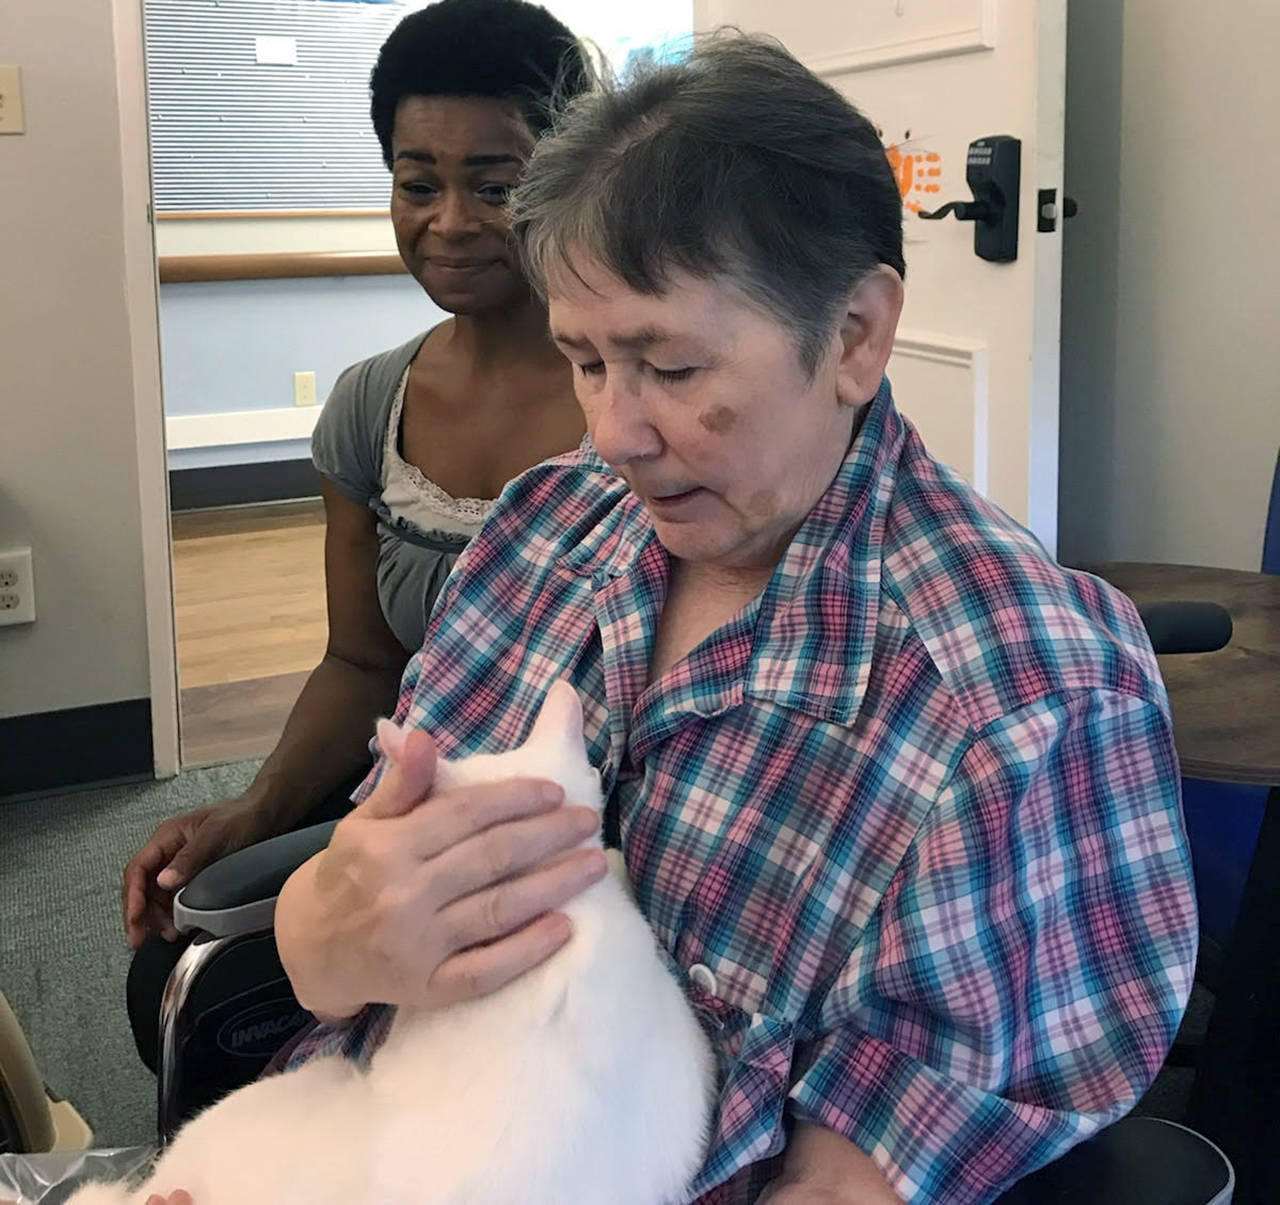 Courtesy photo                                Grays Harbor PAWS volunteer Amy Bates kneels next to Pacific Care resident Frannie Brown as she cuddles with Spot, one of the Aberdeen shelter’s adoptable cats. Bates visits the Hoquiam facility every Tuesday with a few PAWS residents in tow. “The residents look forward to her coming,” said Shannon Ashlock, activity director at Pacific Care.